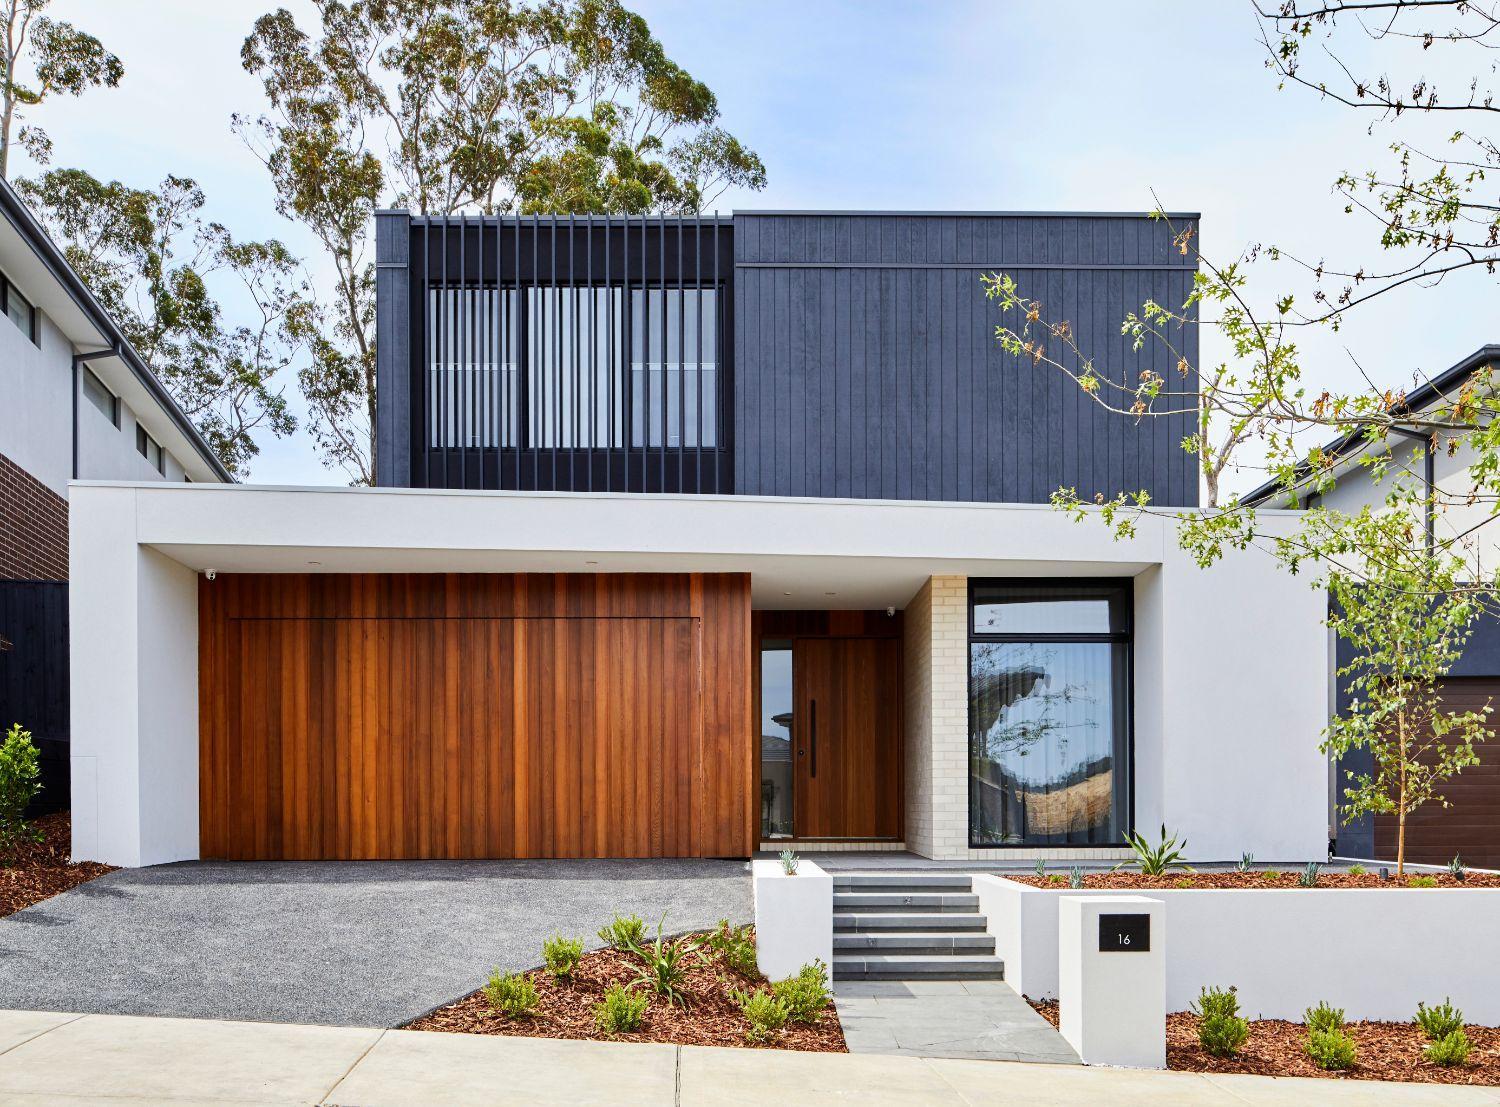 Examples of hebel blocks, panels and walls in Thomas Archer homes